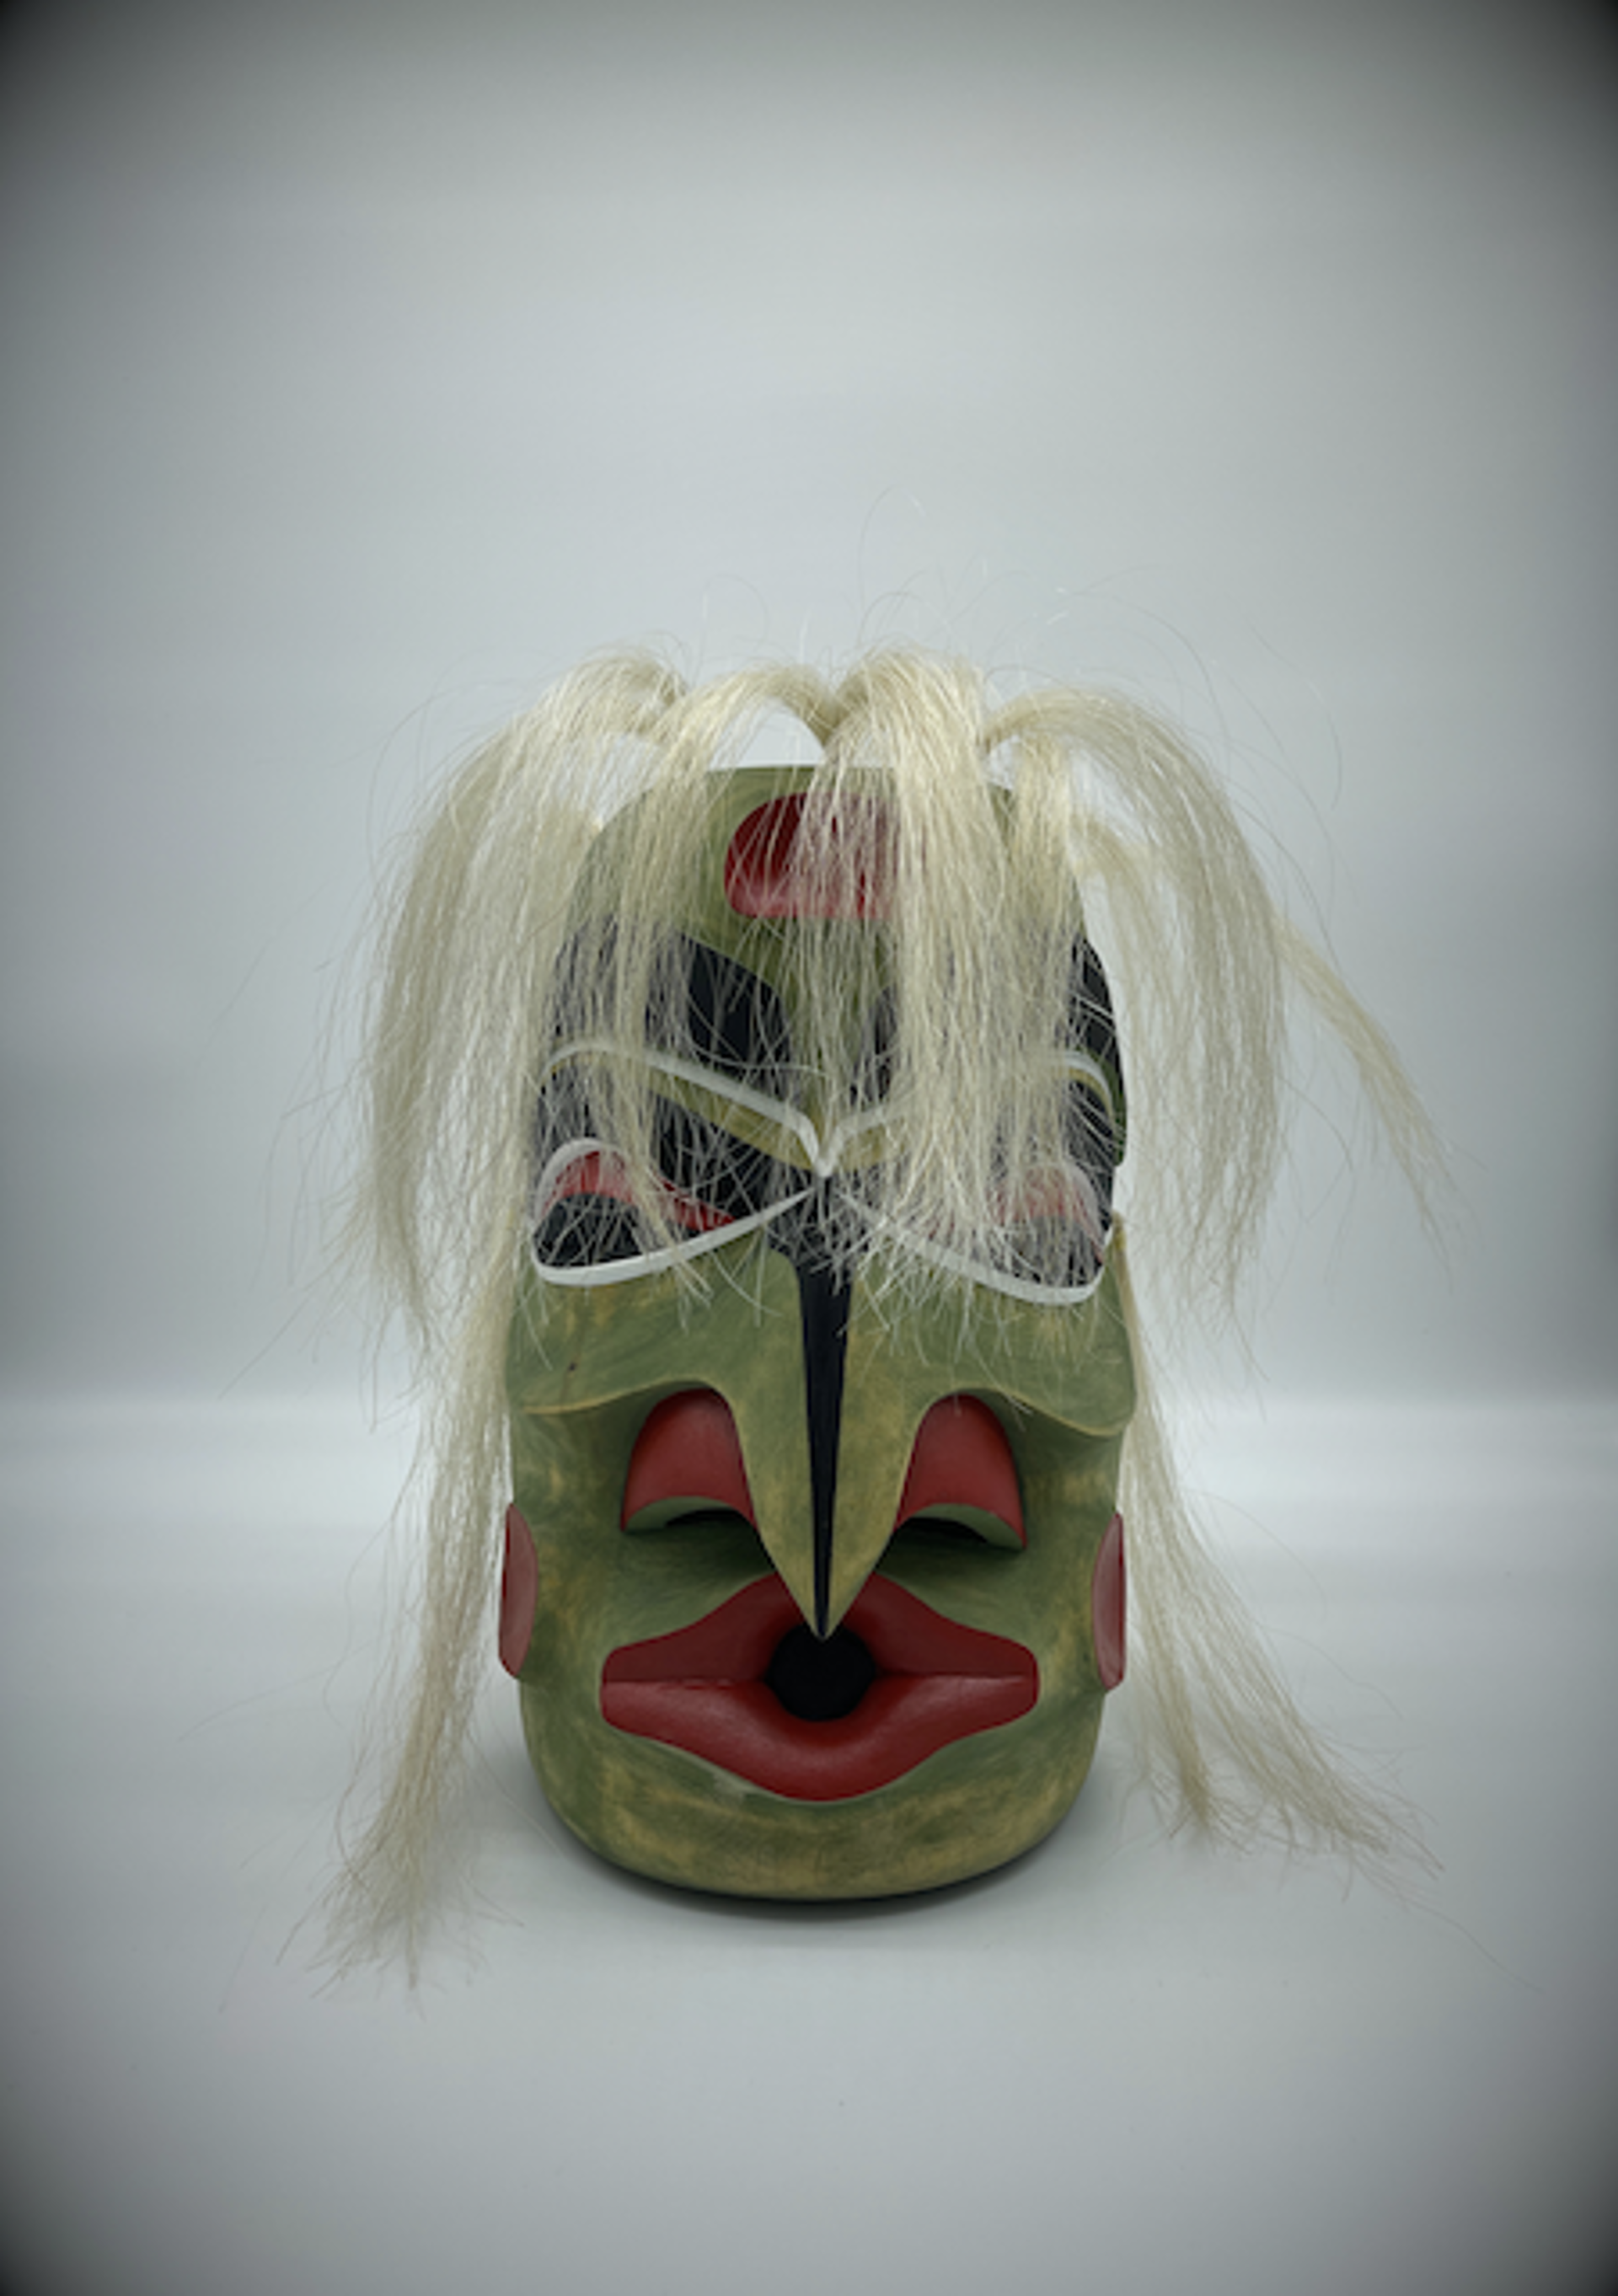 Wild Woman of the Woods Mask by Wilfred Sampson